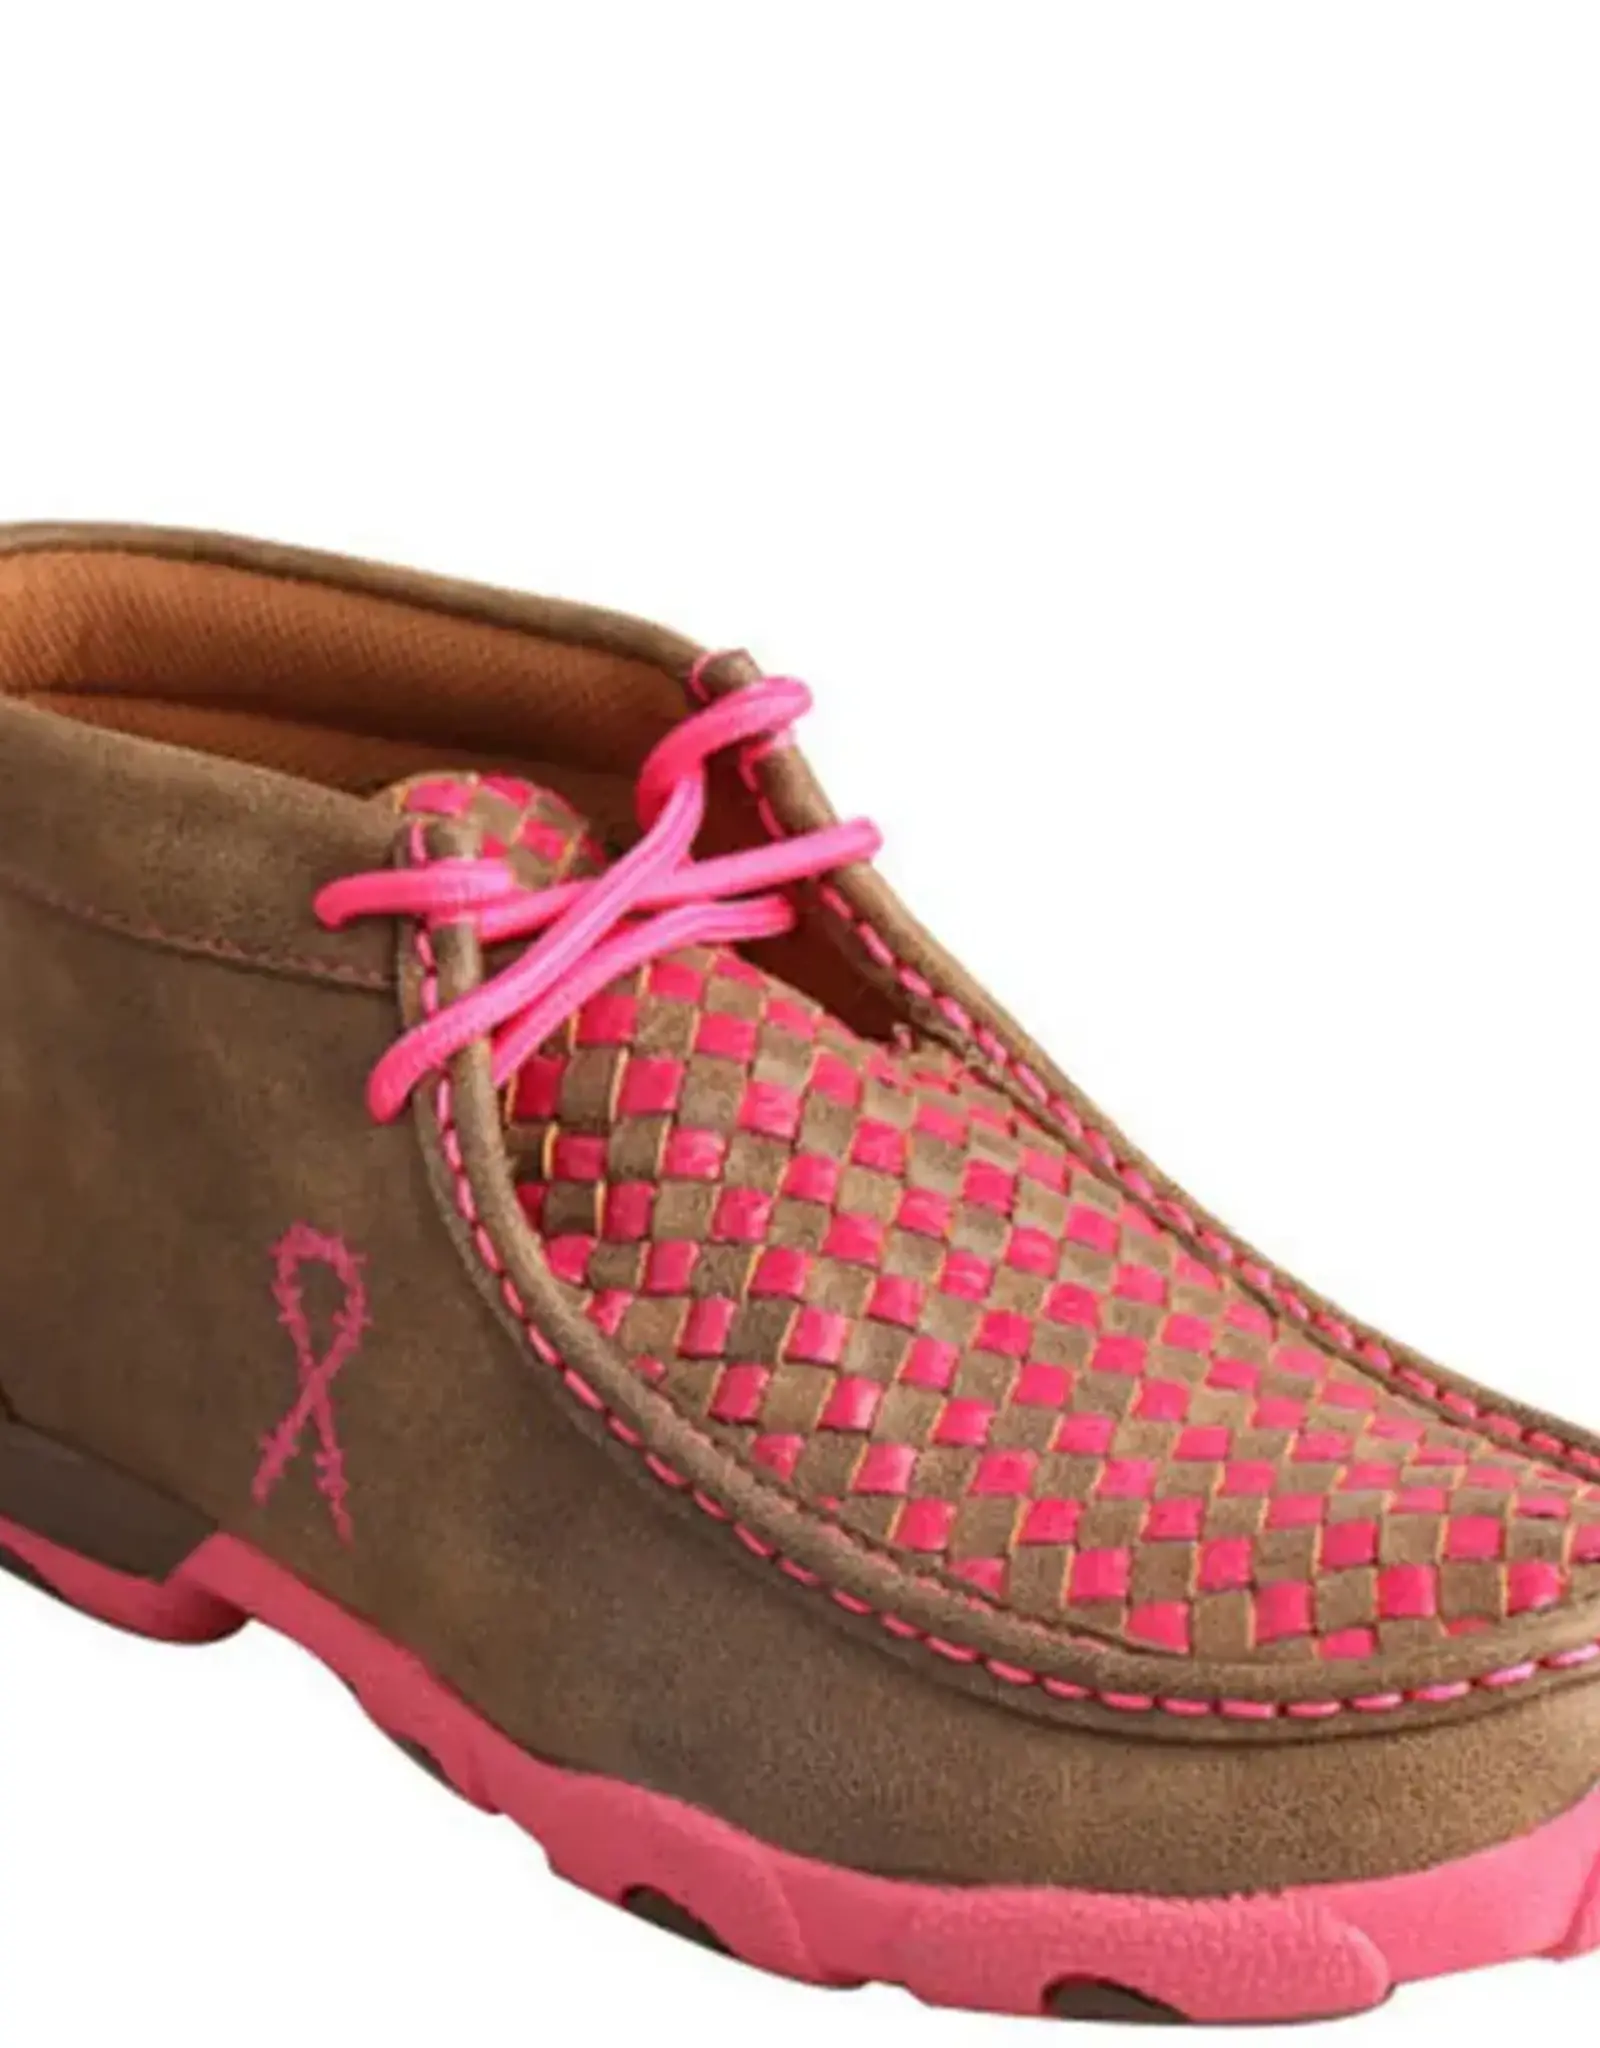 Womens Twisted X Slip On Moc Pink Lace Up Shoe